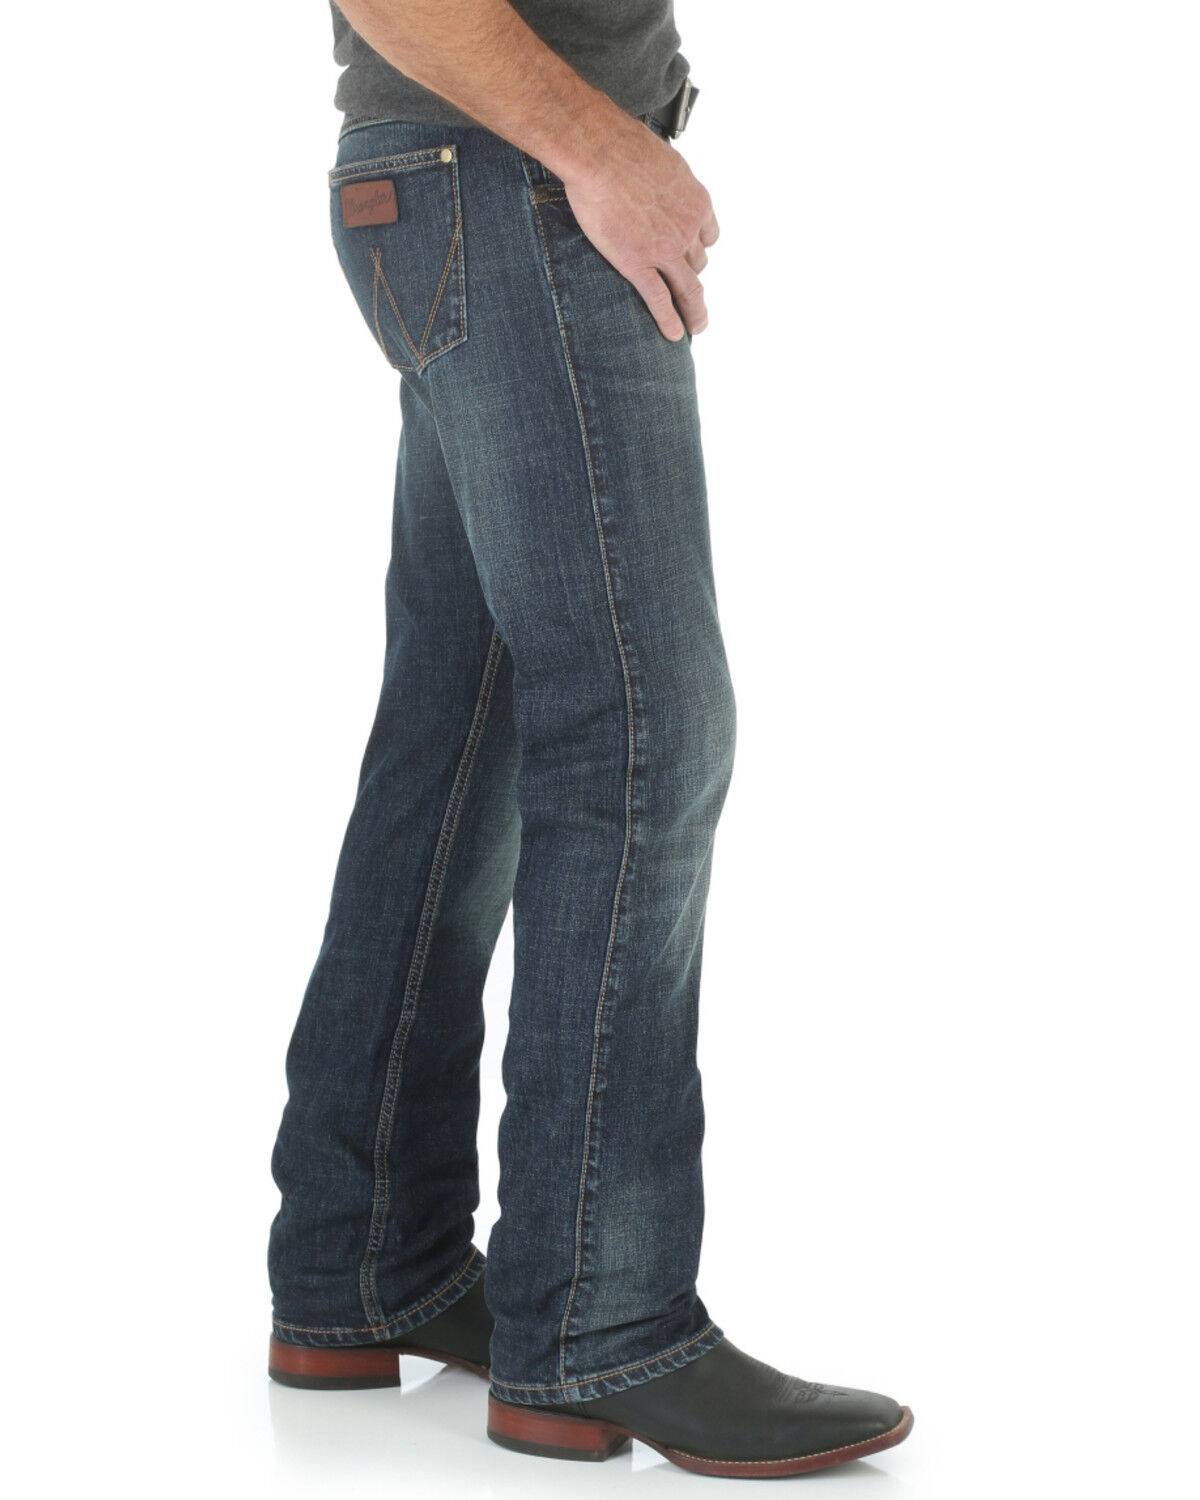 boots with slim fit jeans